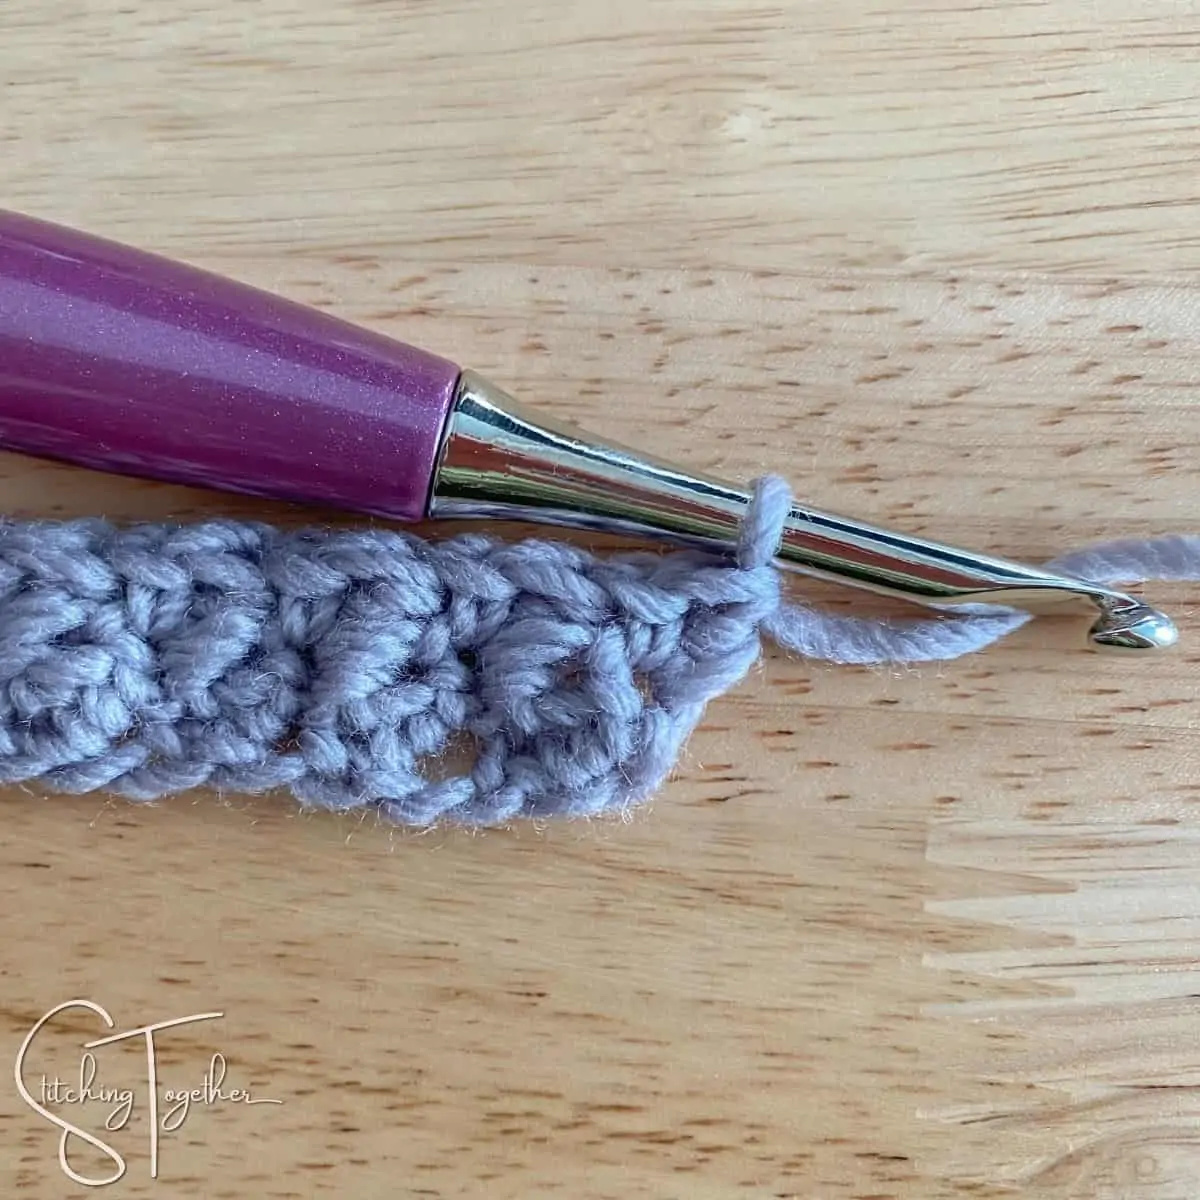 crochet hook and yarn showing row 2 of suzette stitch completed